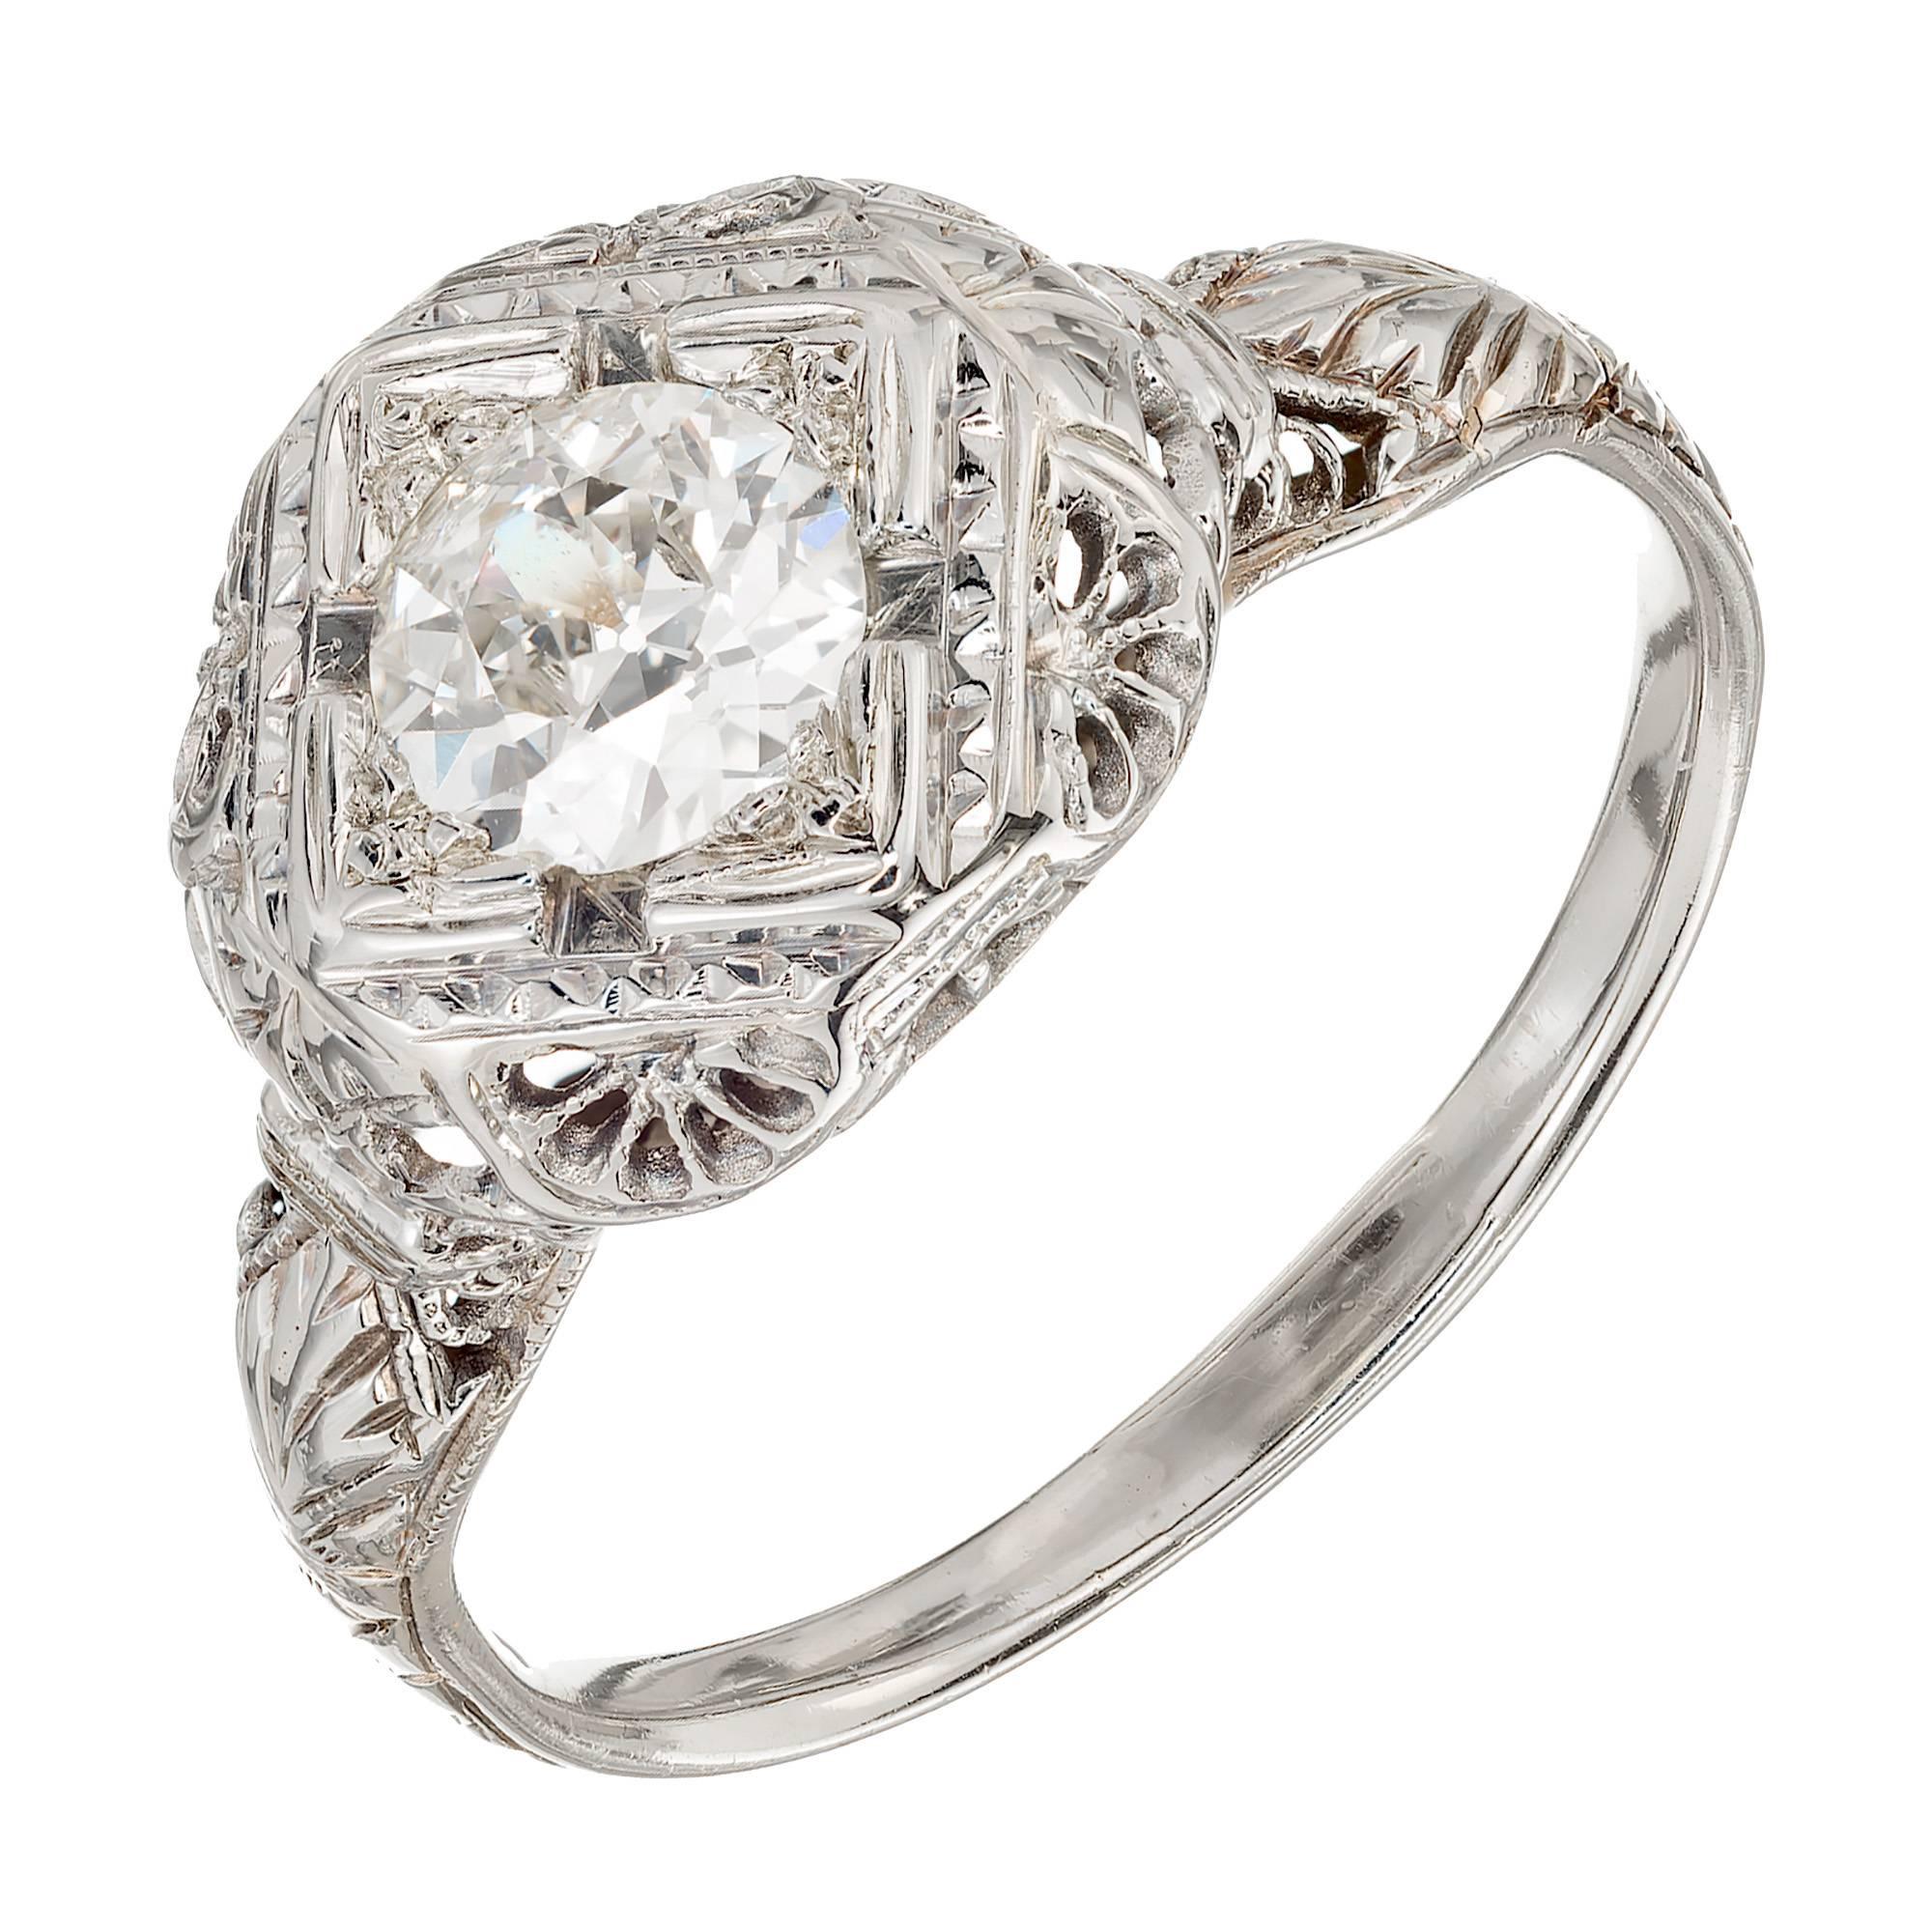 Egl certified Art Deco old European cut diamond filigree 18k white gold engagement ring. 

1 old European cut diamond, approx. total weight .65cts, G-H, SI2, Depth: 50.7% Table: 51%, EGL certificate # US310953203D
Size 8 and sizable
18k white